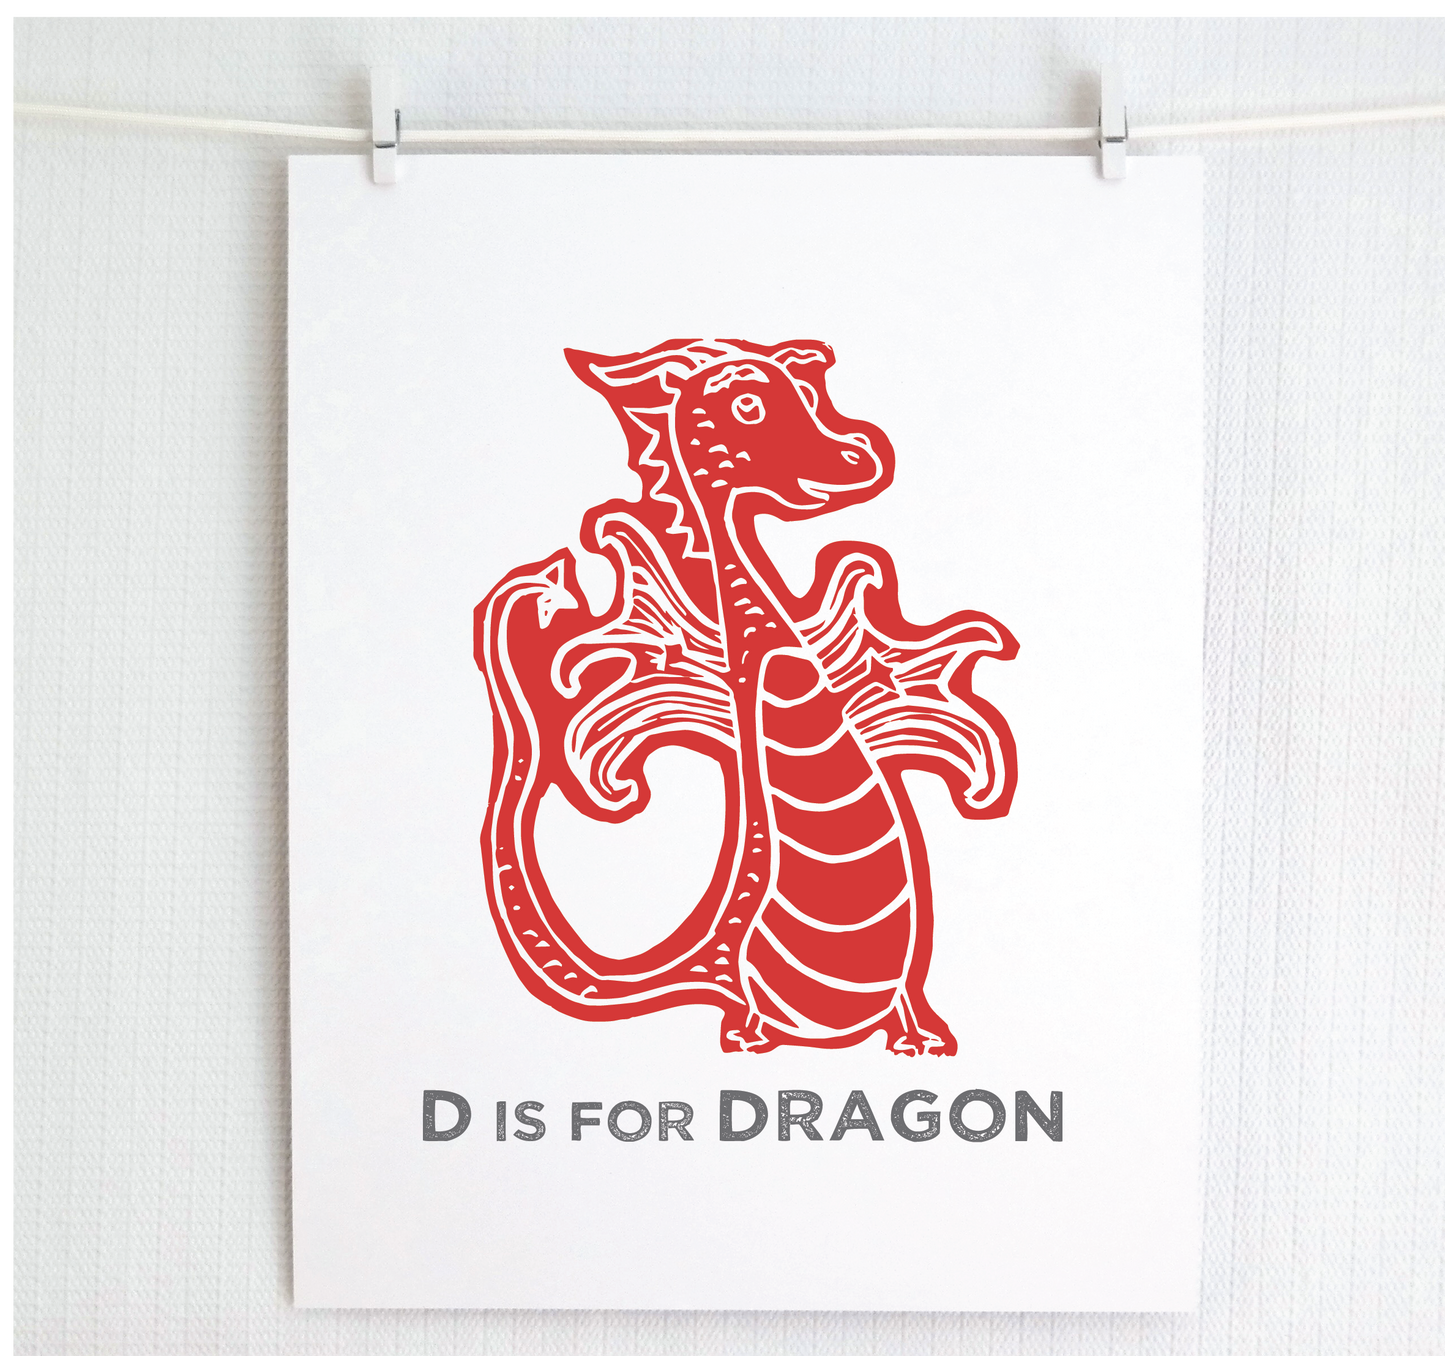 D is for Dragon